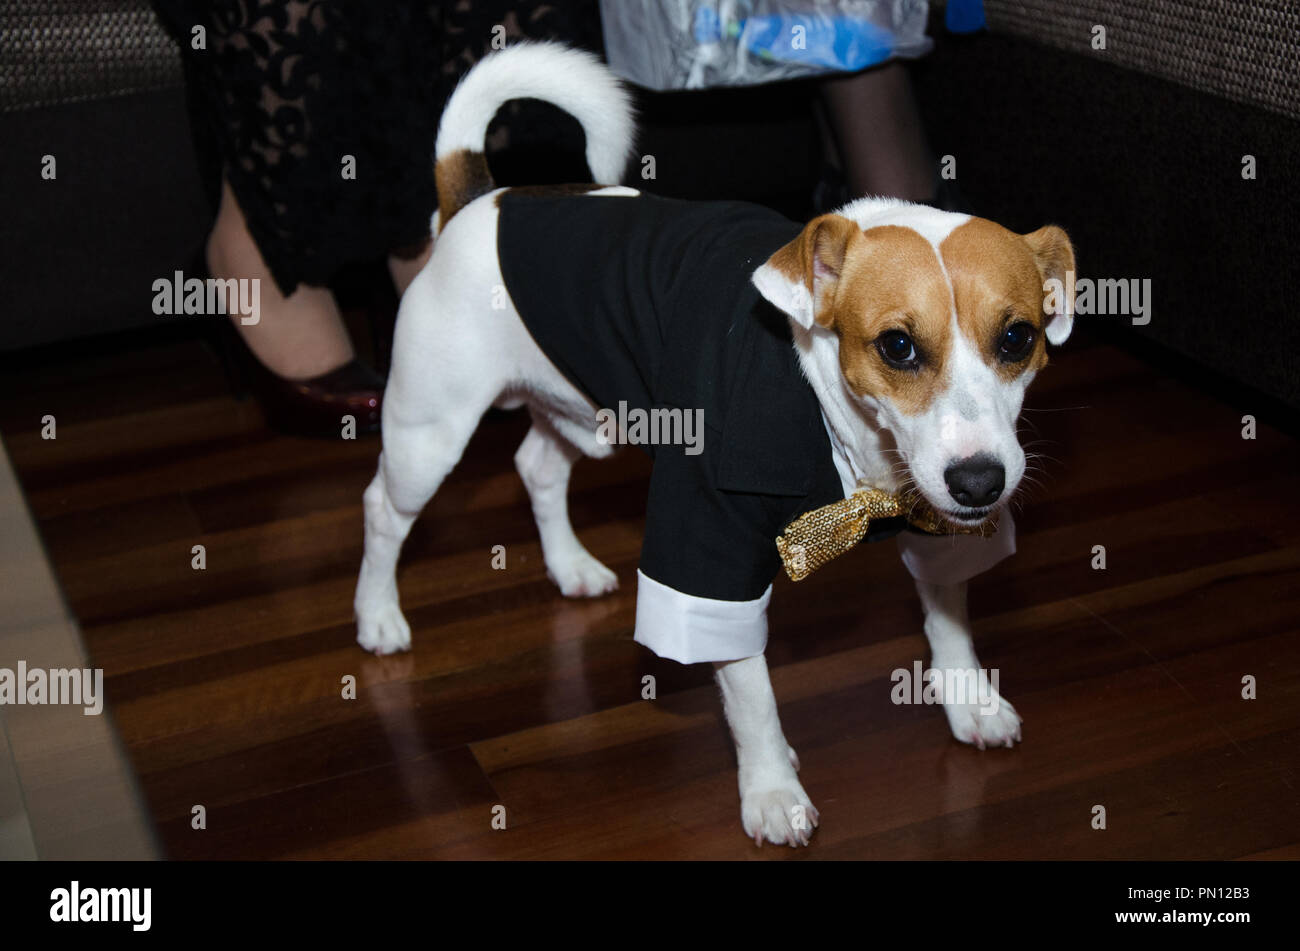 Jack Russell dog dressed smartly, dog with tie, funny photo Stock Photo